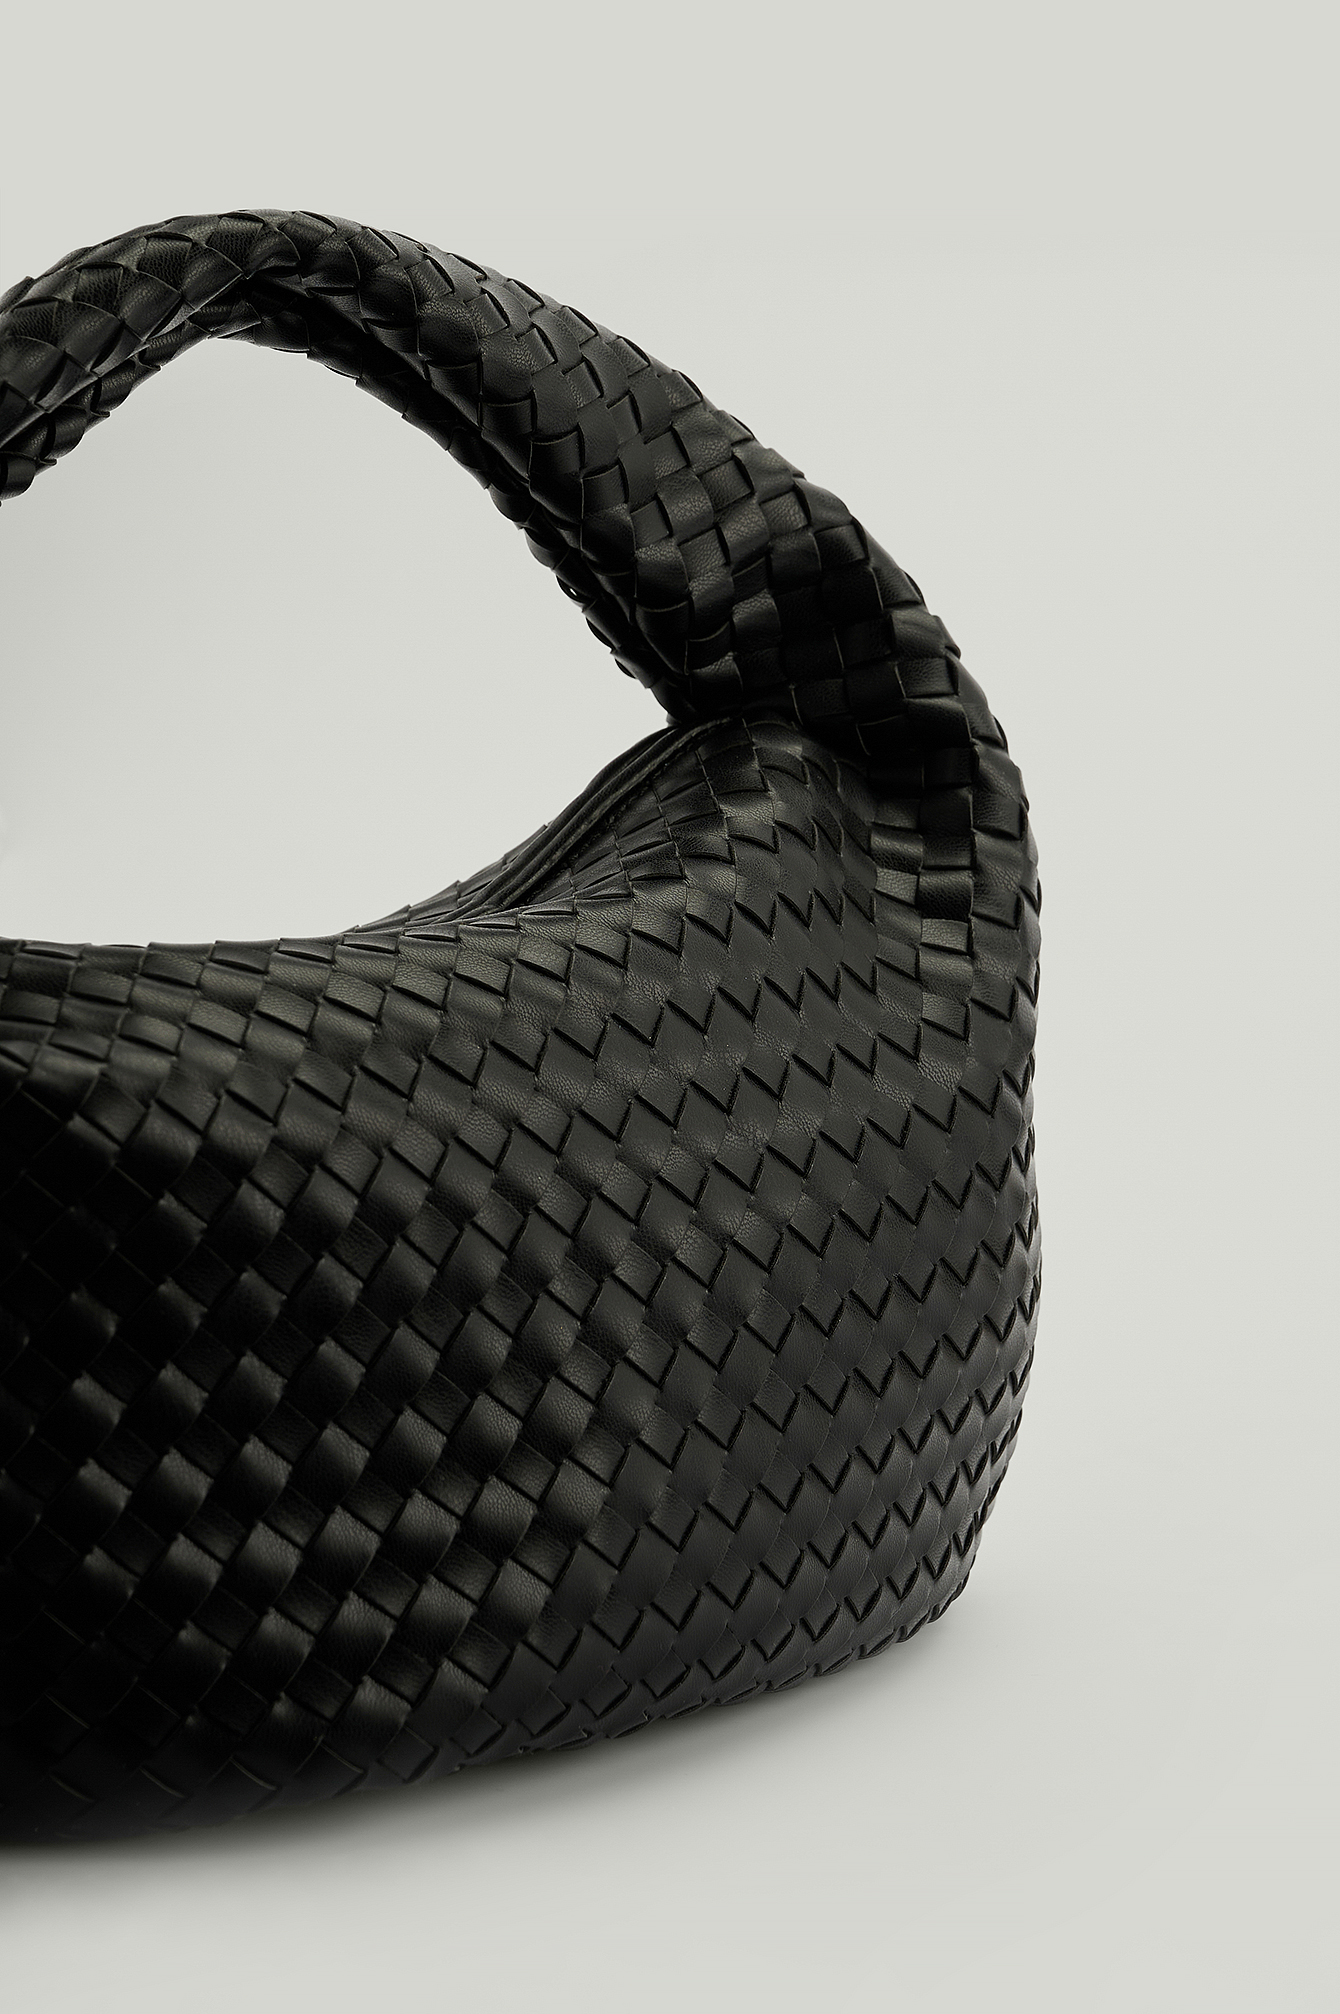 Black Woven Rounded Bag